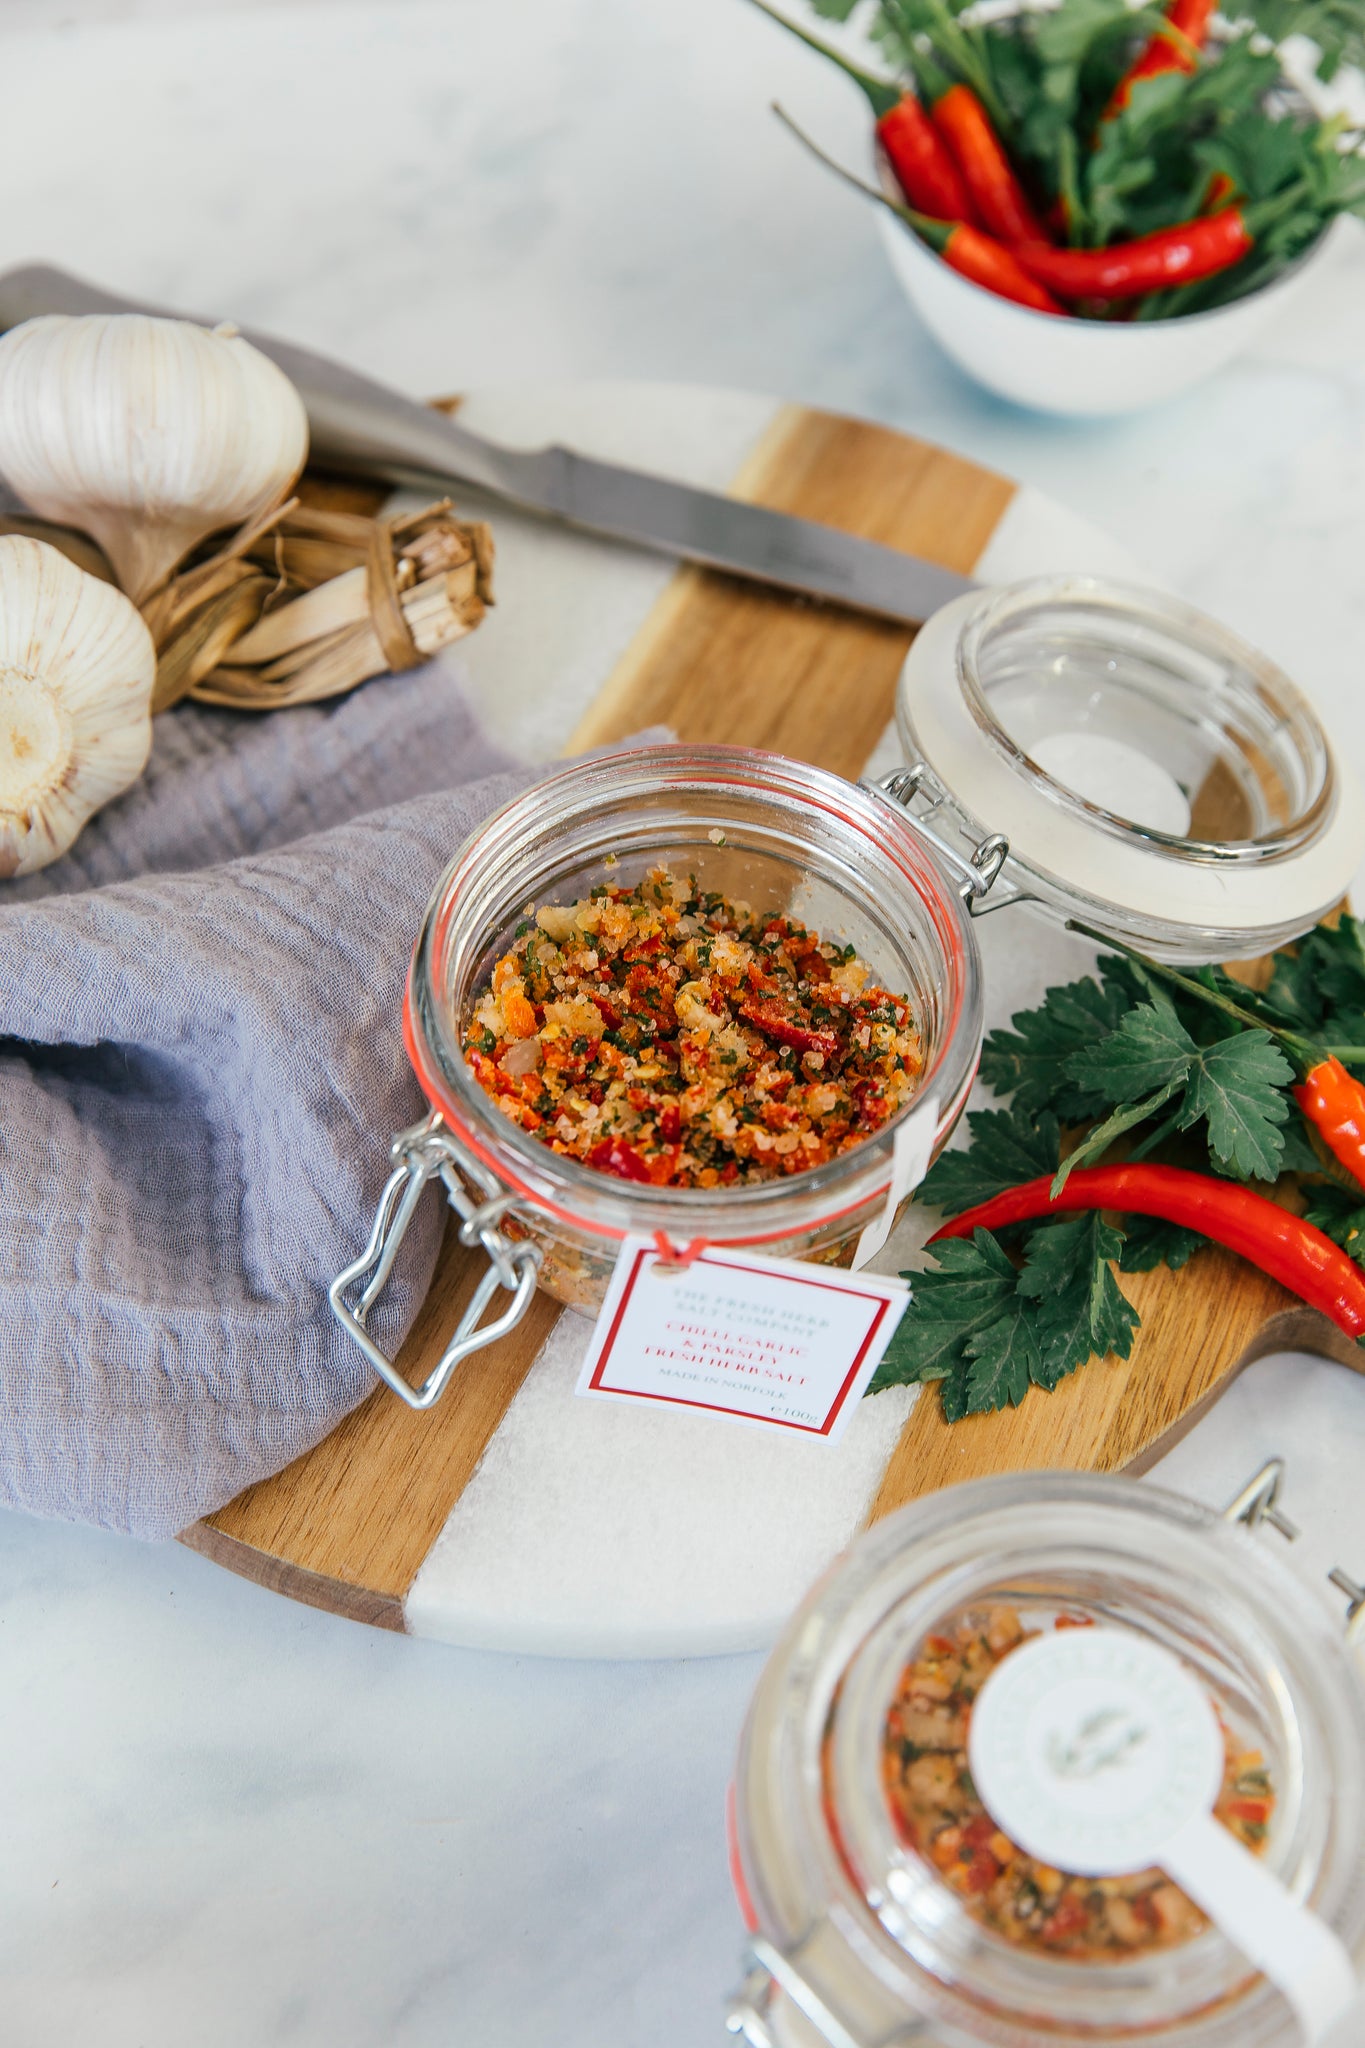 Savour the essence of Chilli, Garlic, and Parsley Fresh Herb Seasoning melded with pure white coarse and fine sea salt in this picturesque glass Kilner jar. Designed for sustainability, the jar invites refilling with our practical and eco-friendly refill pouches